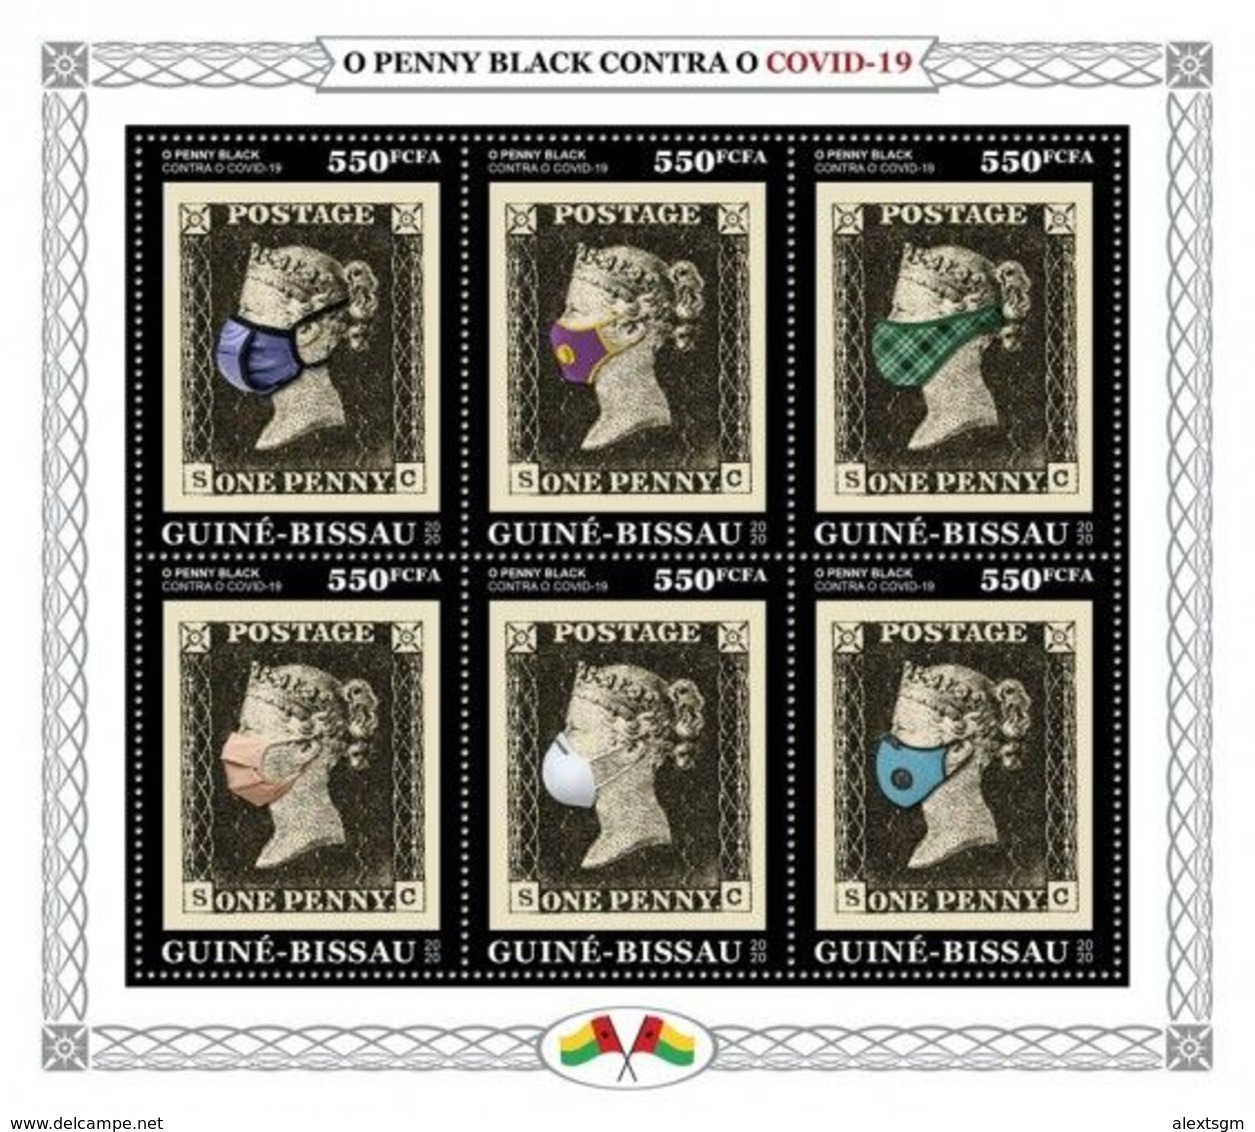 GUINEA BISSAU 2020 - Penny Black COVID-19. Official Issue [GB200317] - Timbres Sur Timbres